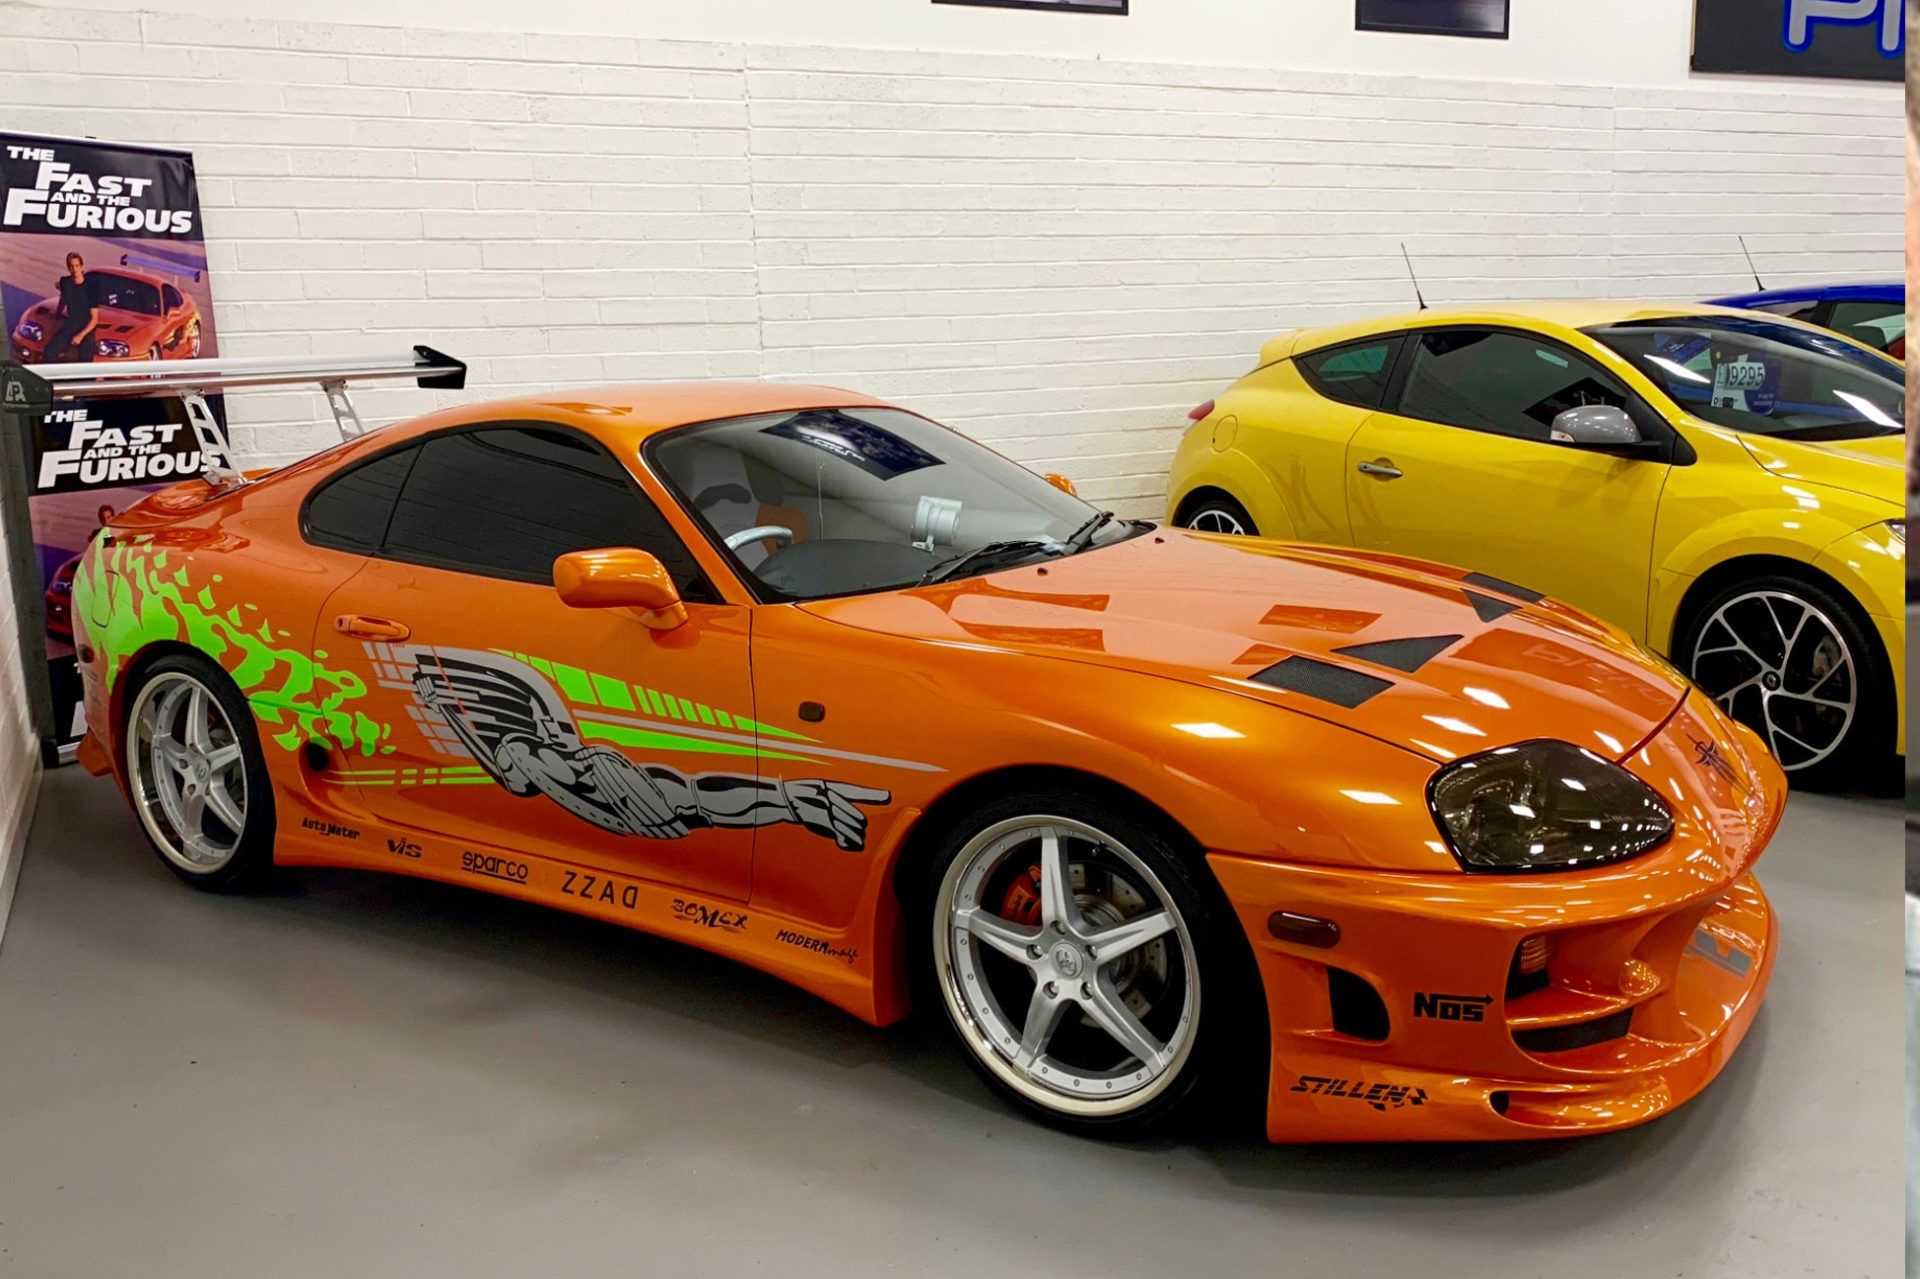 nine-fast-and-furious-cars-for-sale-on-ebay